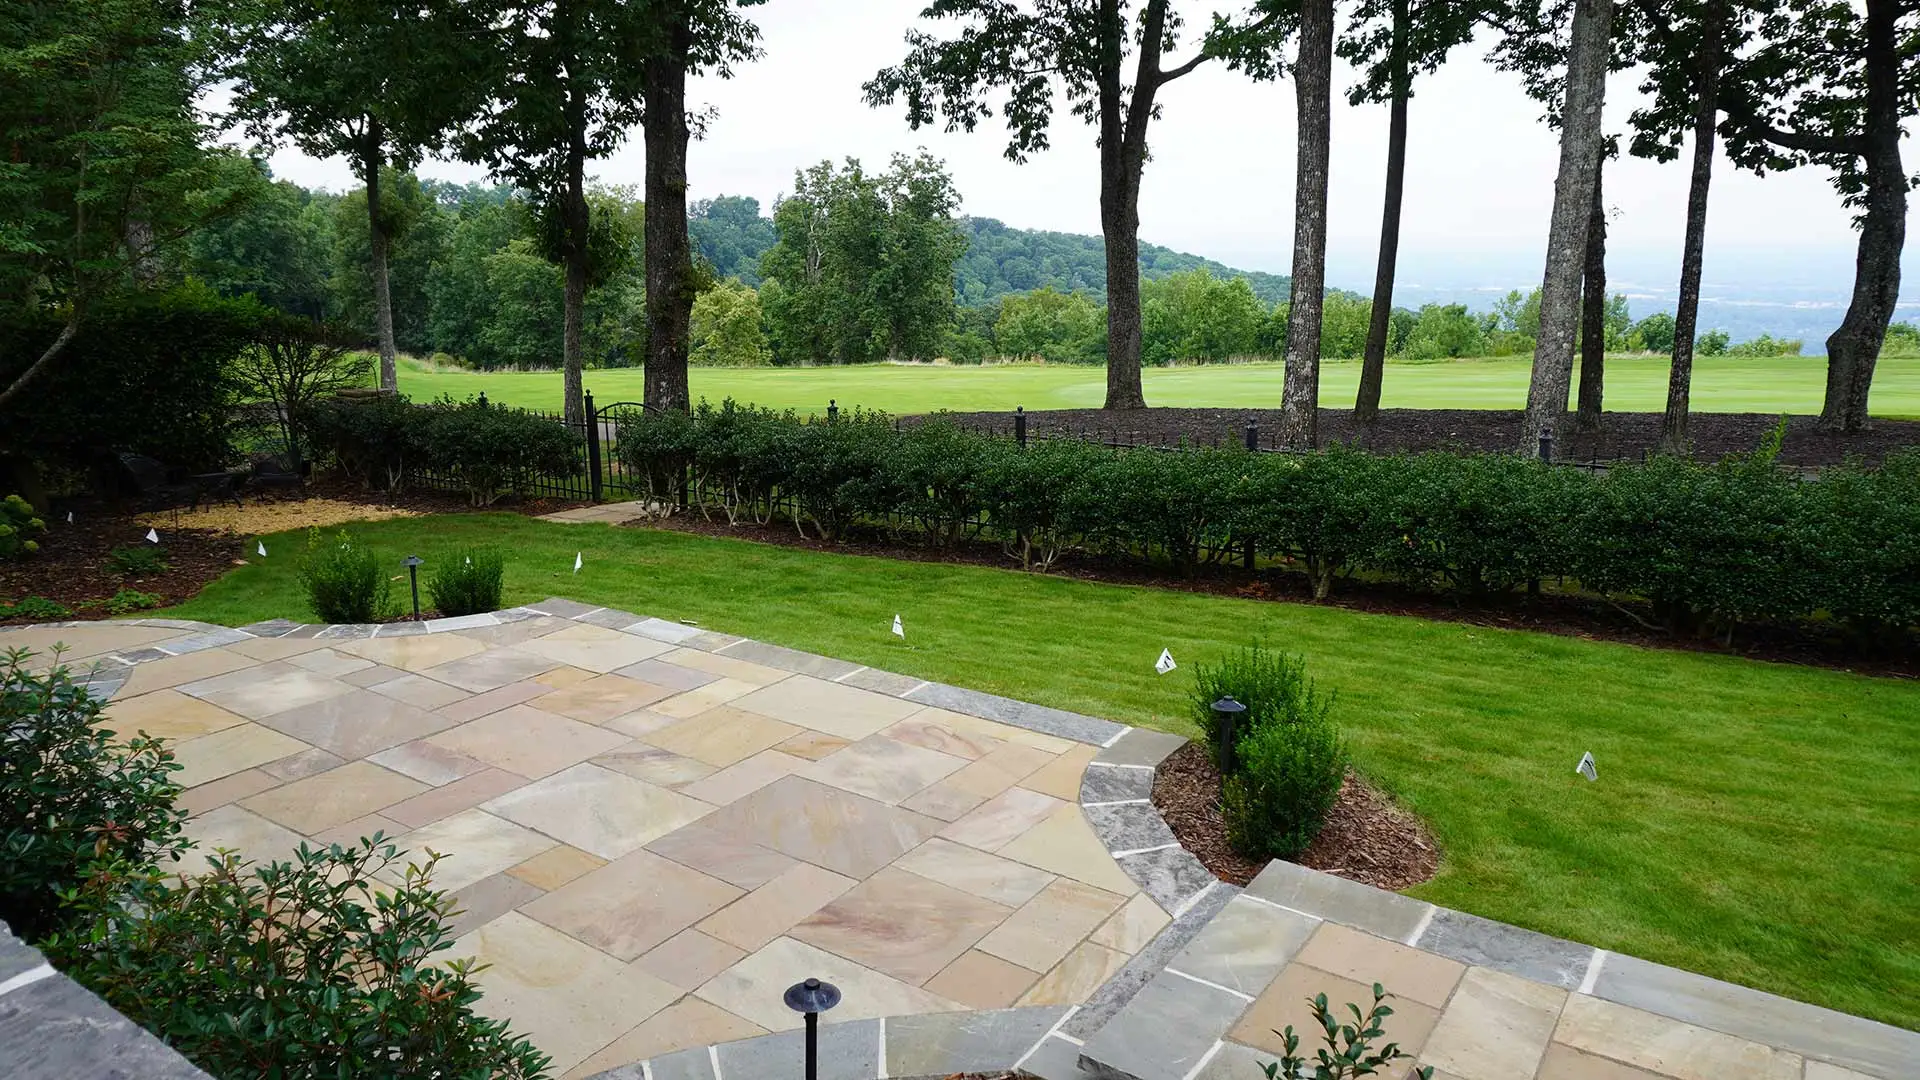 Landscape installed and maintained by Five Star Lawn and Landscaping in Huntsville, AL.